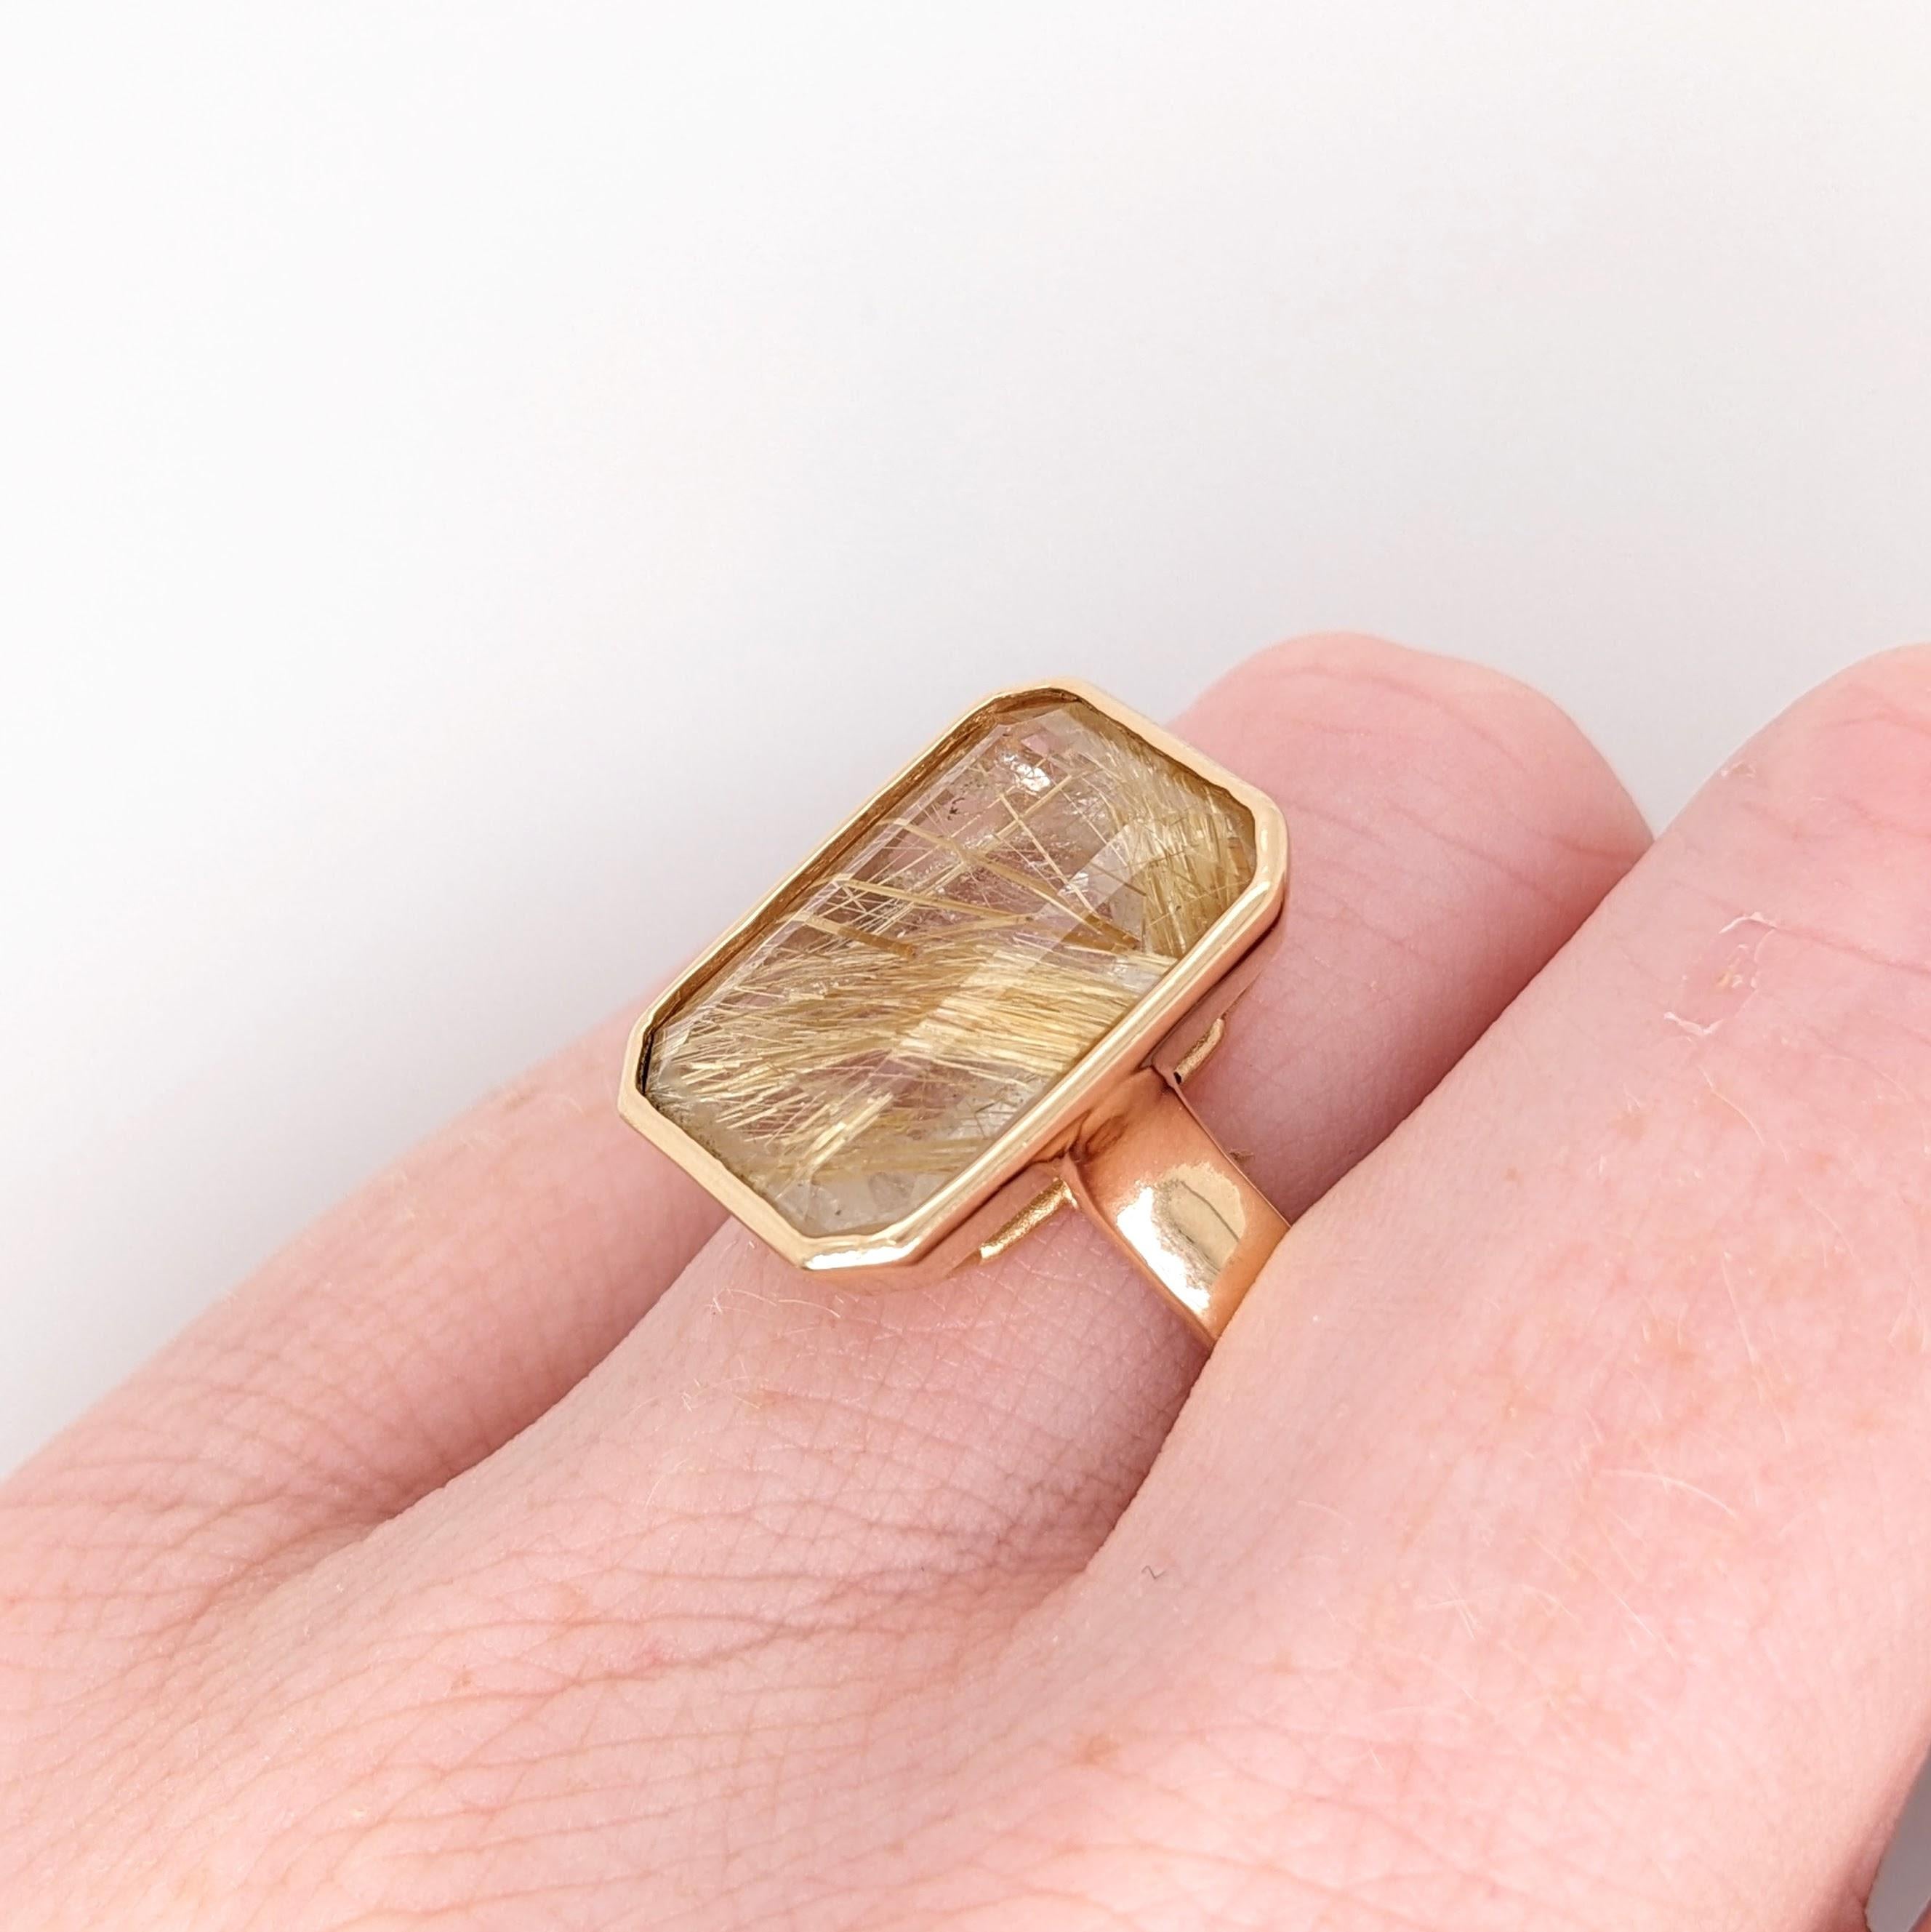 10.42ct Classic Golden Rutile Quartz Ring in 18K Yellow Gold Emerald 17x11mm For Sale 1